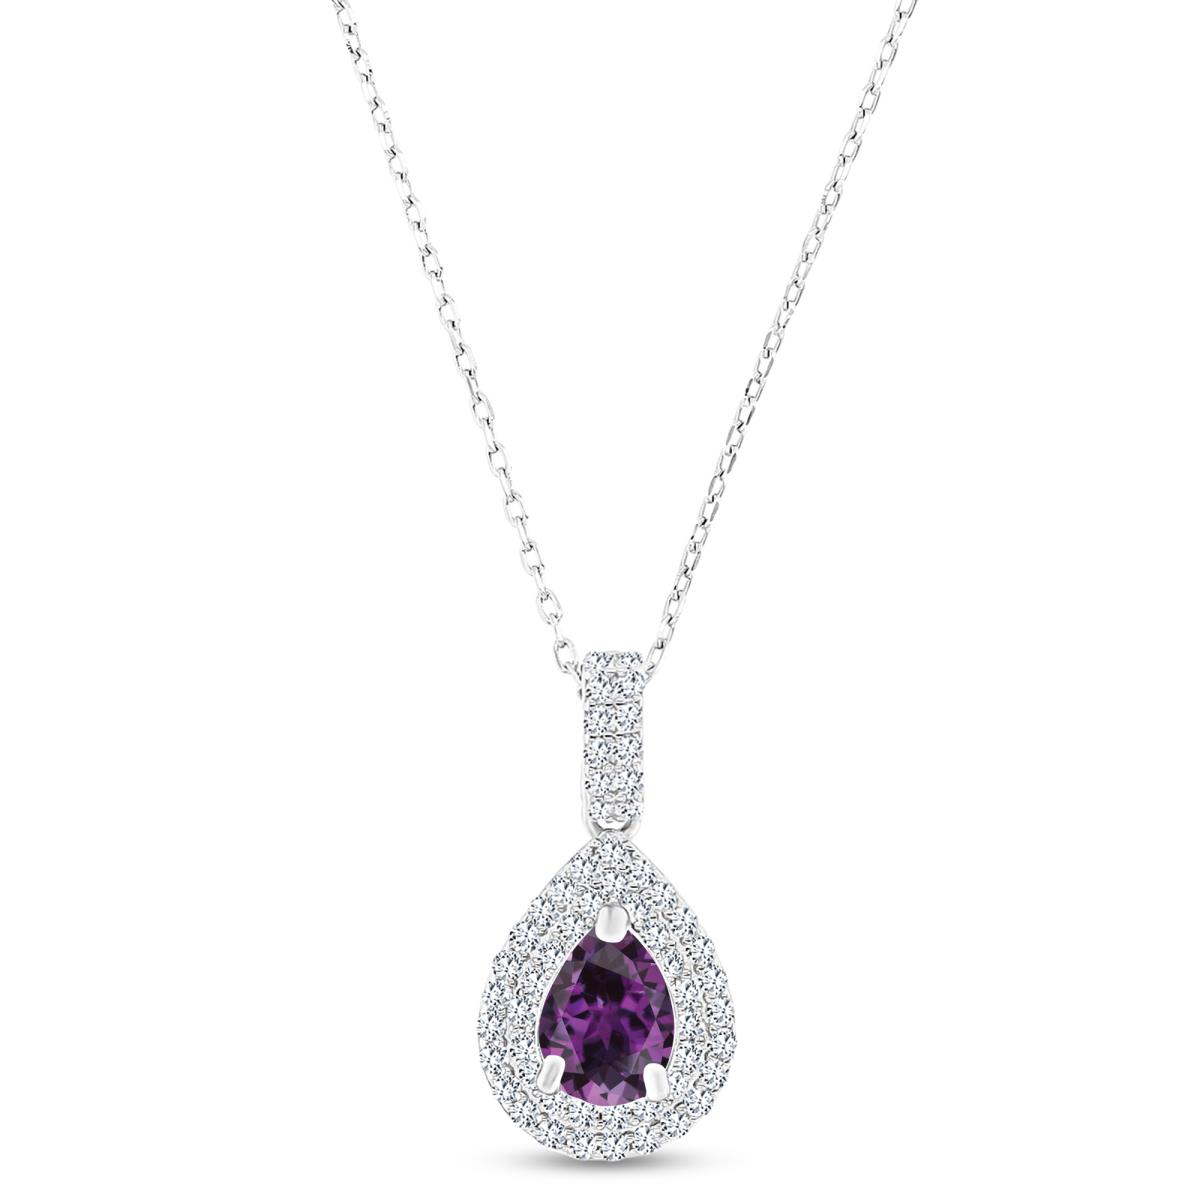 Sterling Silver Rhodium 8x6mm PS Cr Alexandrite/ Cr White Sapphire Double Halo 16"+2" Necklace